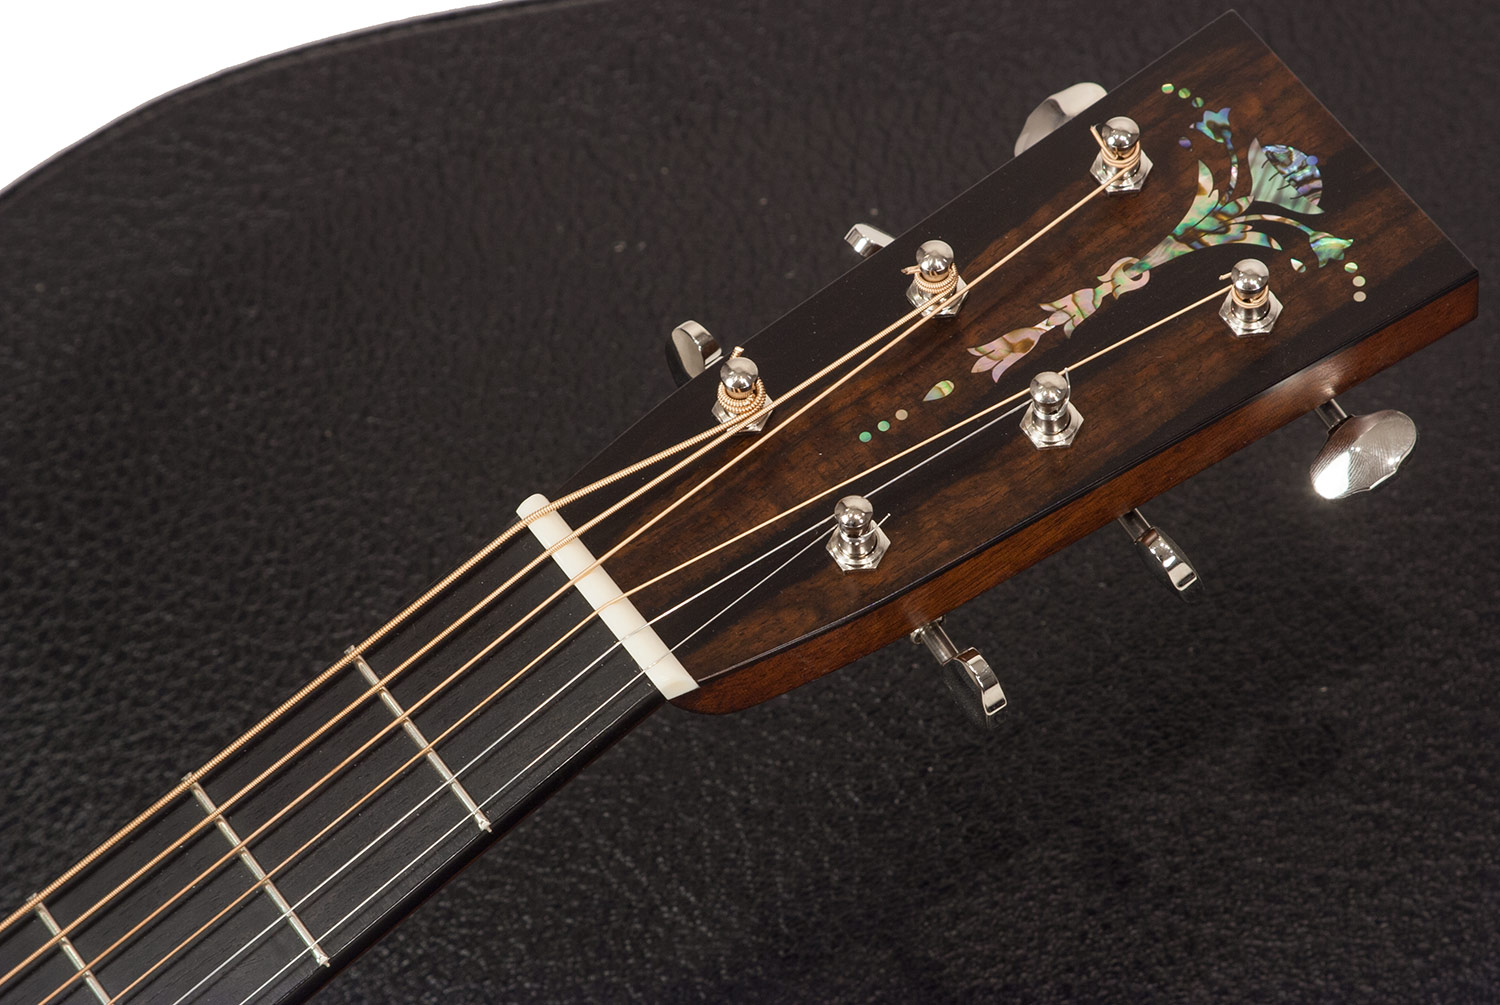 Collings D2h Custom Satin Neck, Torch Head #27113 - Natural - Acoustic guitar & electro - Variation 6